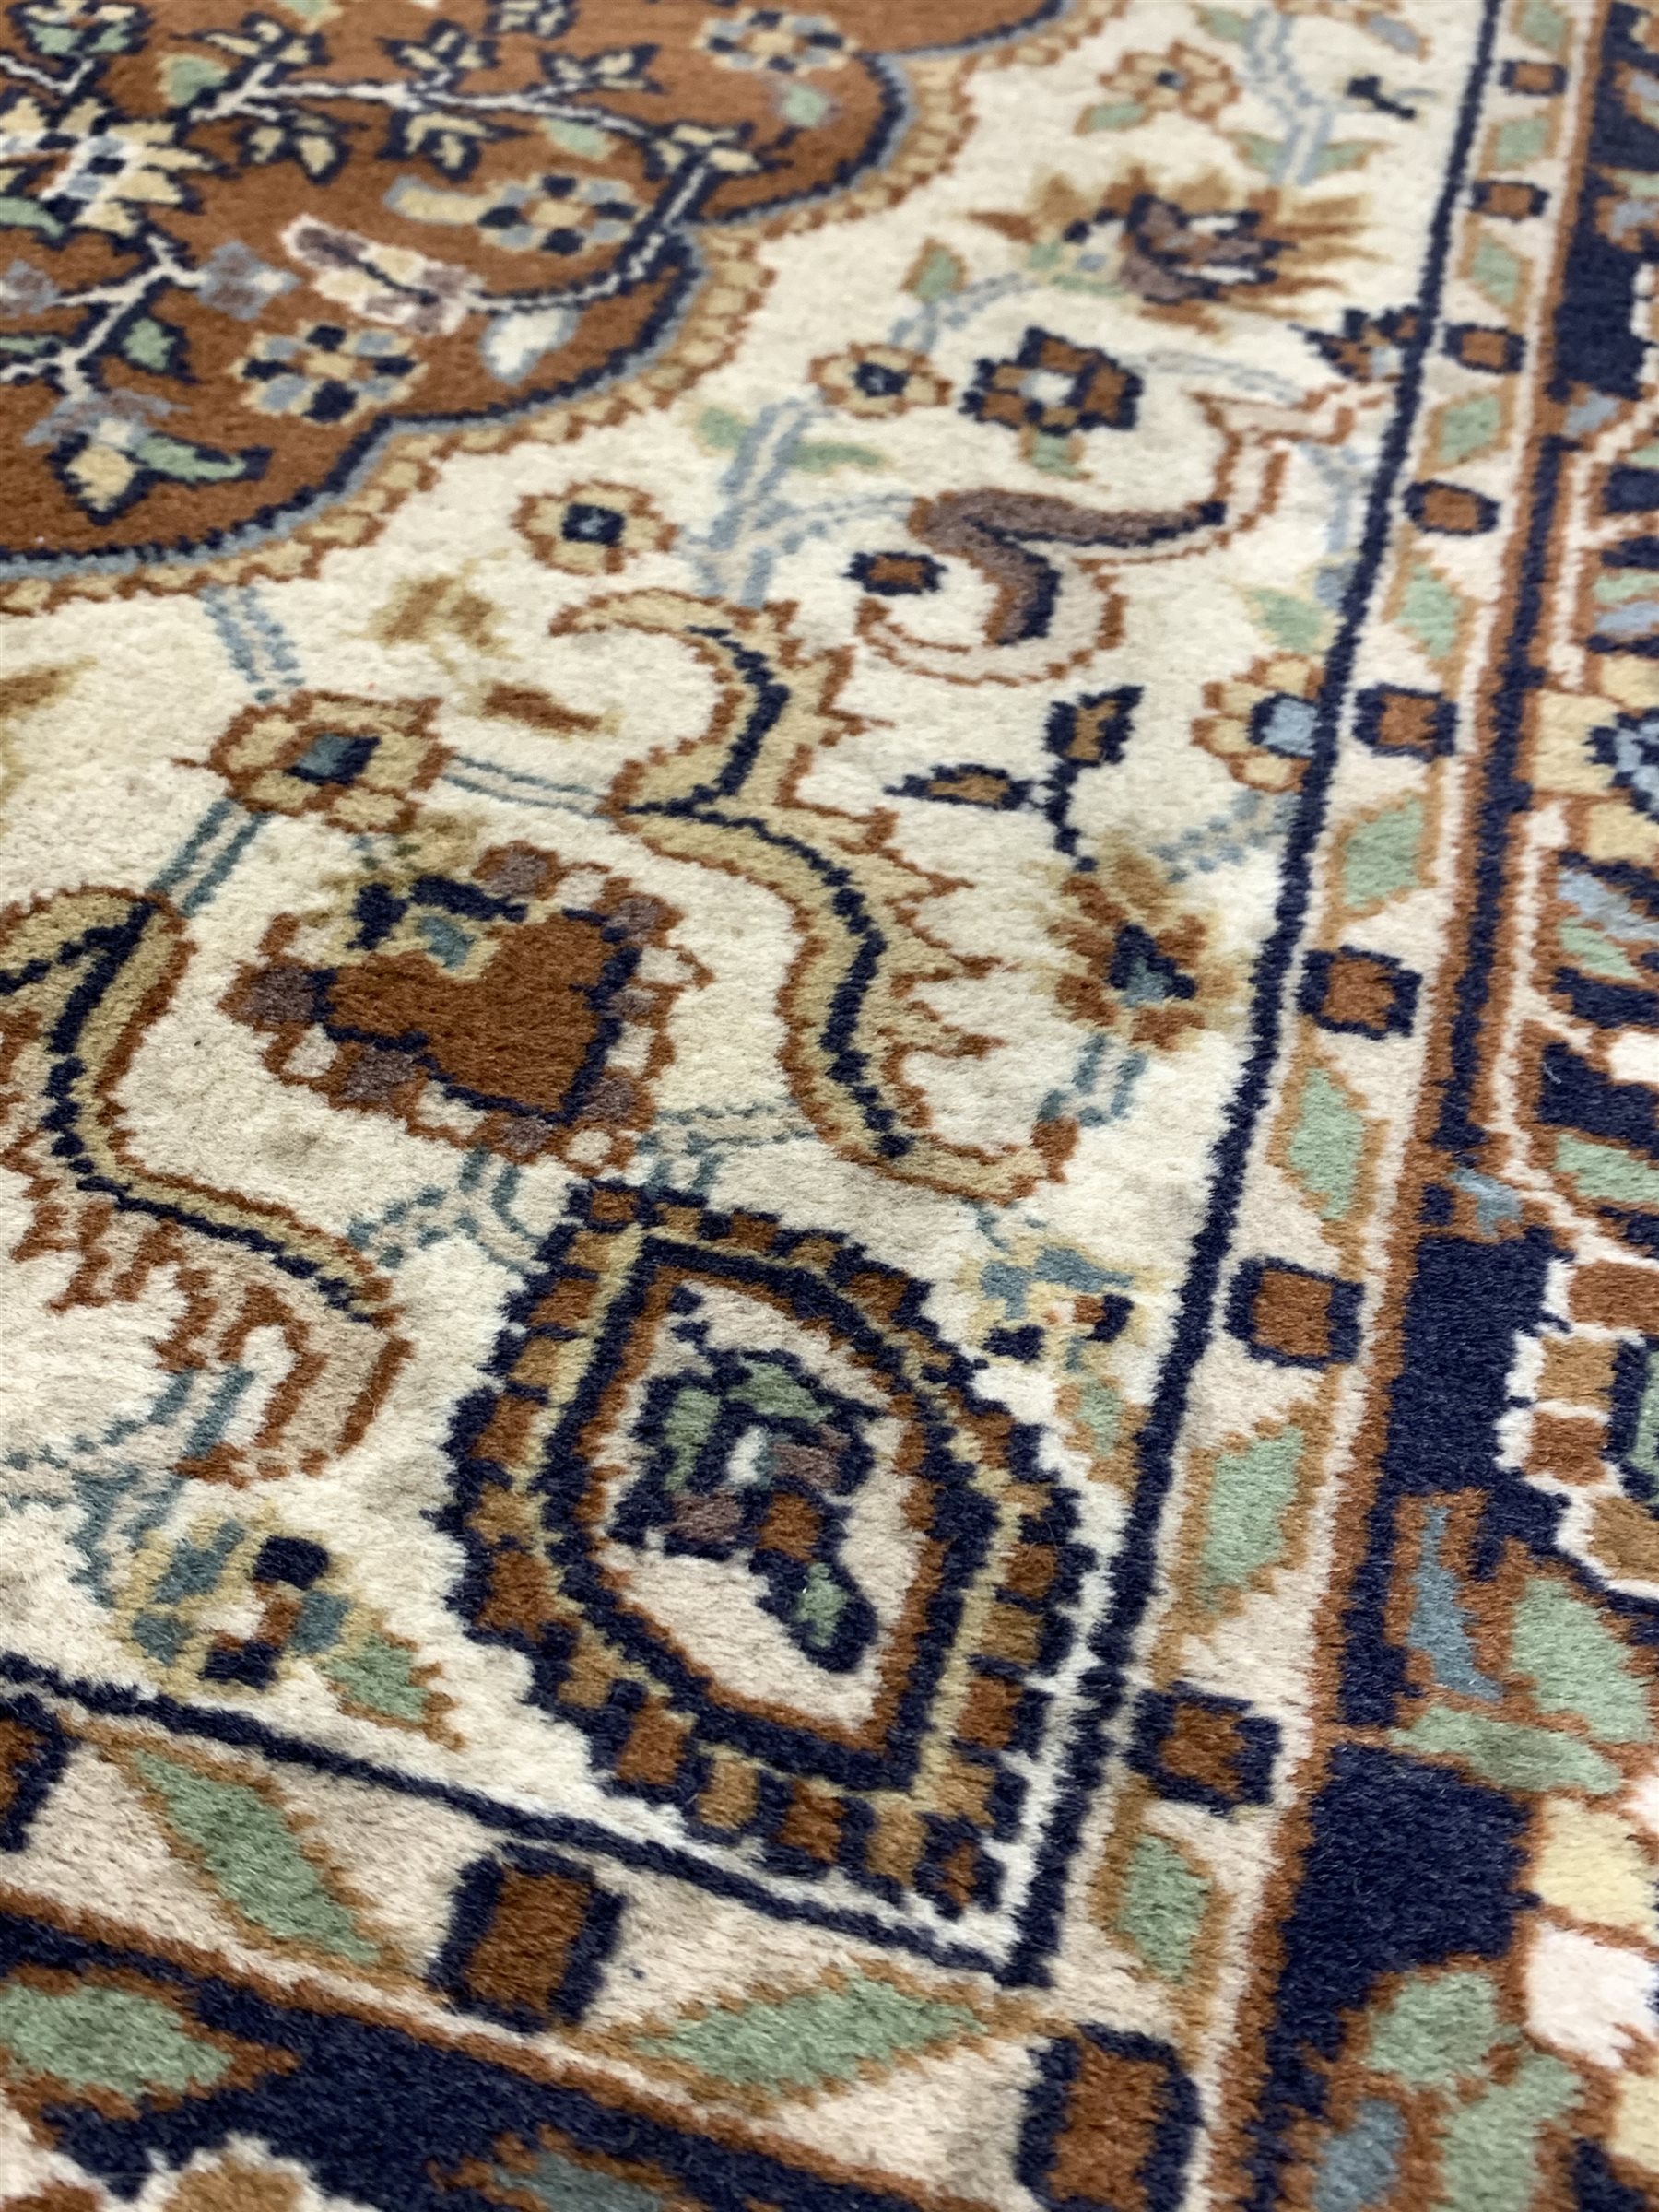 Persian design rug of blues, browns, and greens - Image 2 of 3